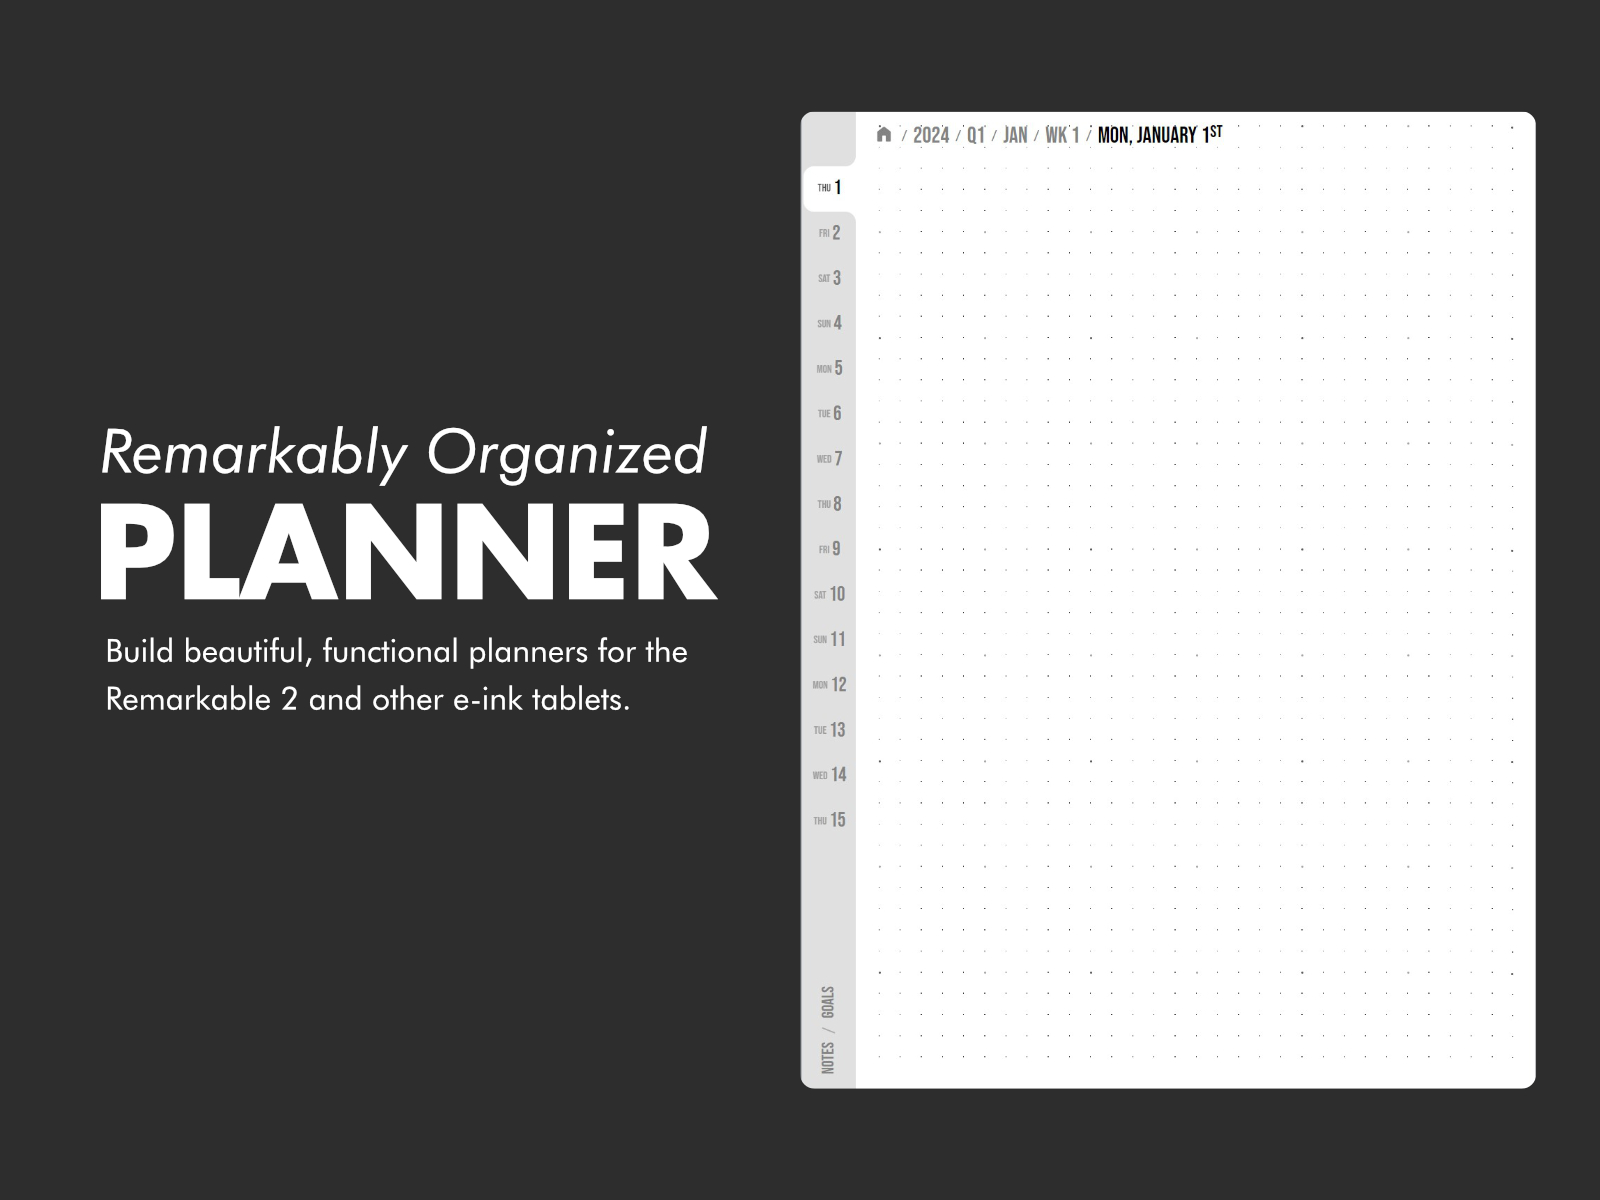 Remarkably Organized Planner